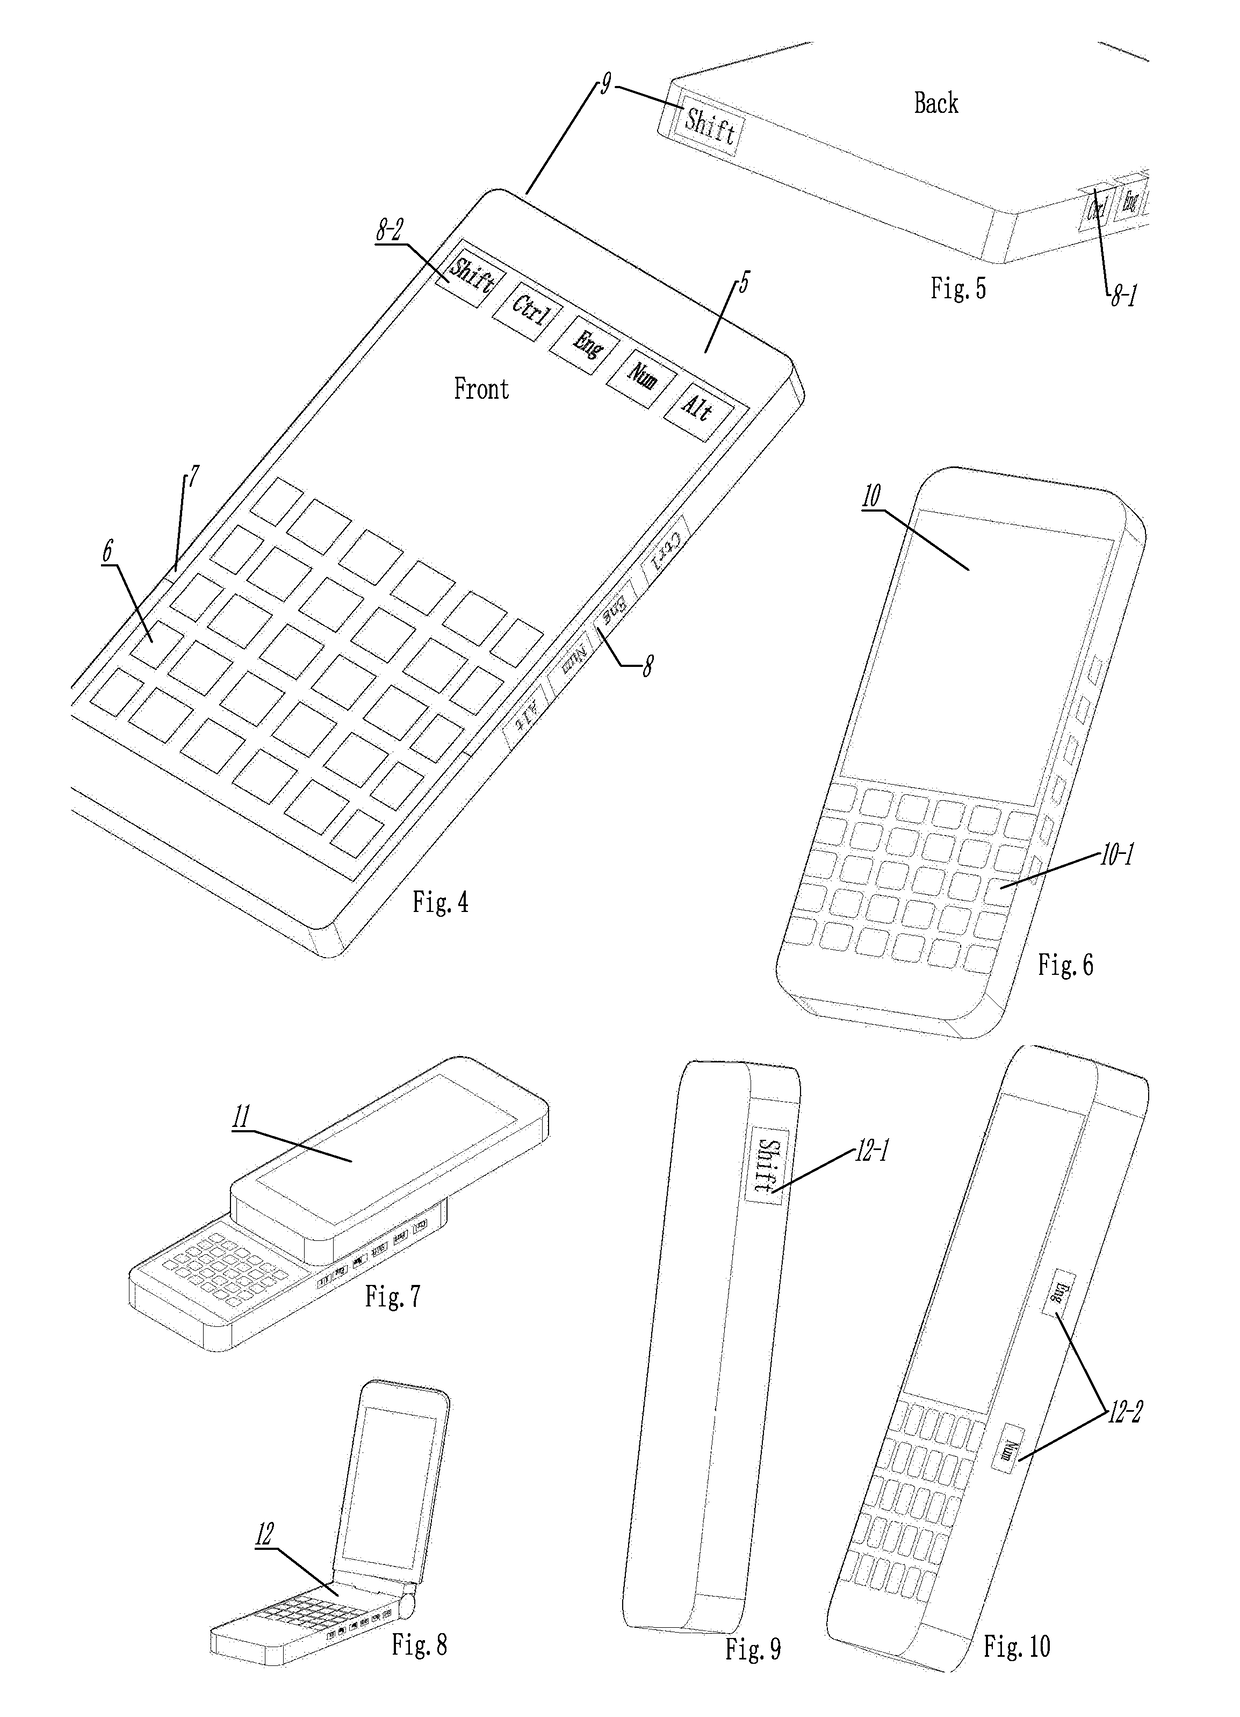 Keyboard and mouse of handheld digital device